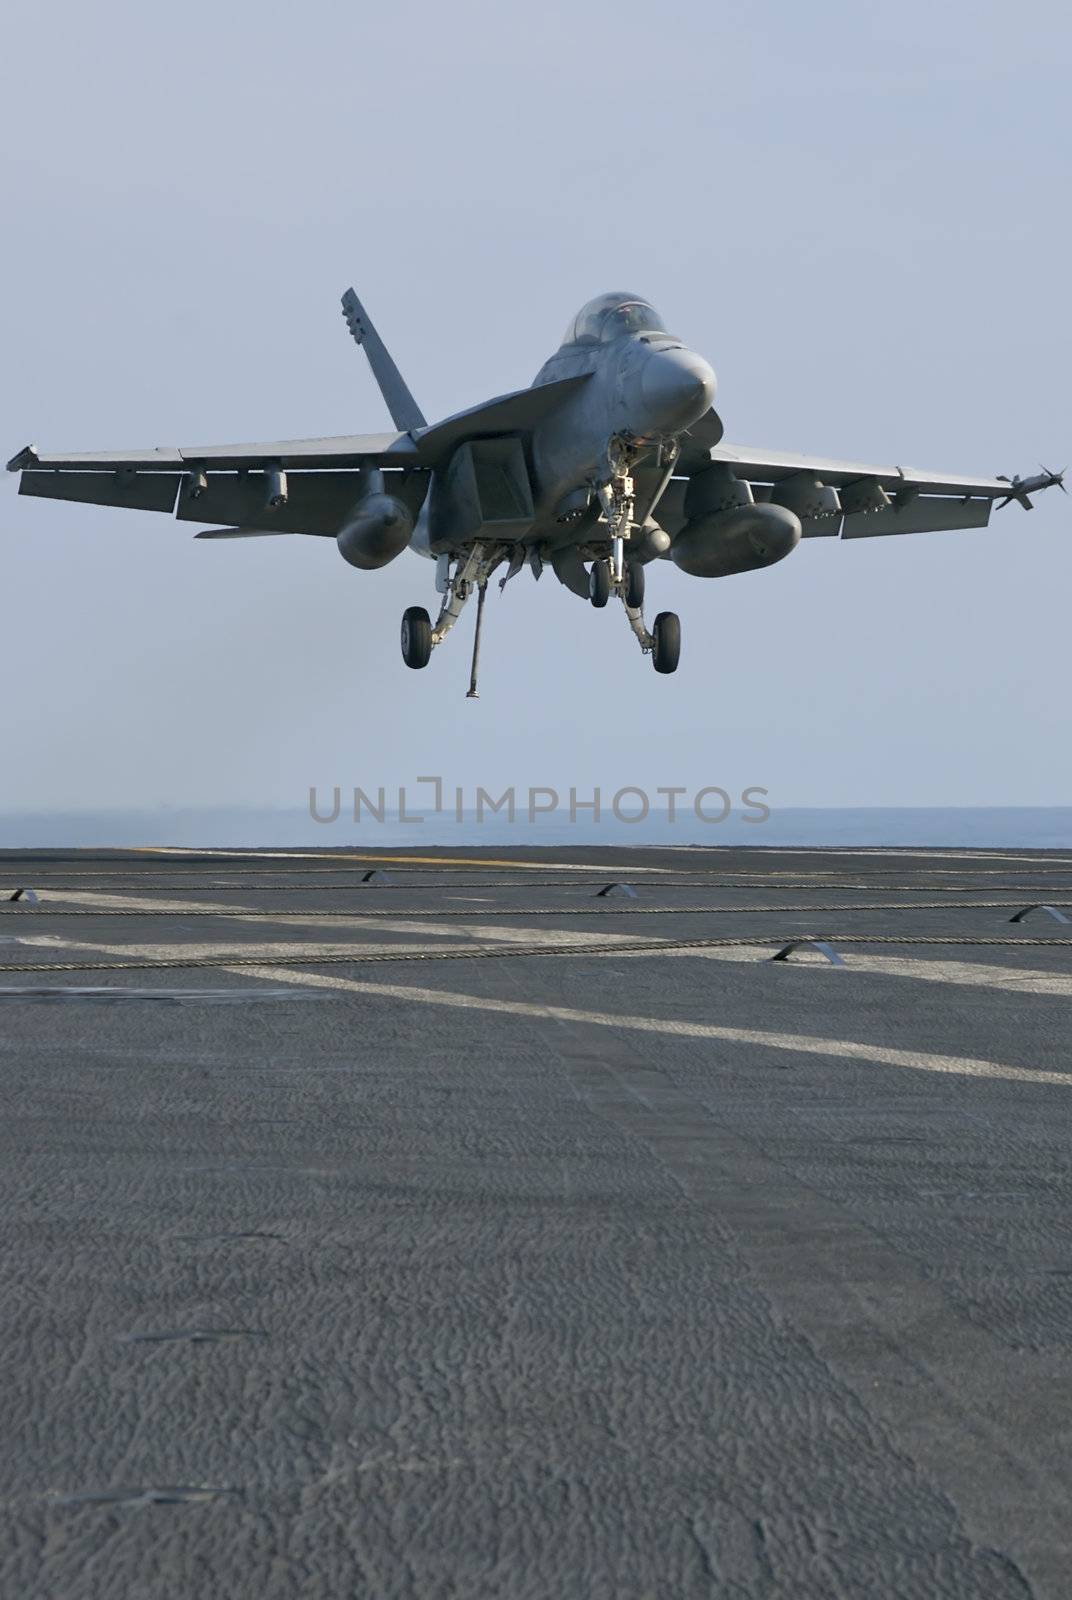 An F-18 Super Hornet moments away from trapping onboard a nuclear aircraft carrier